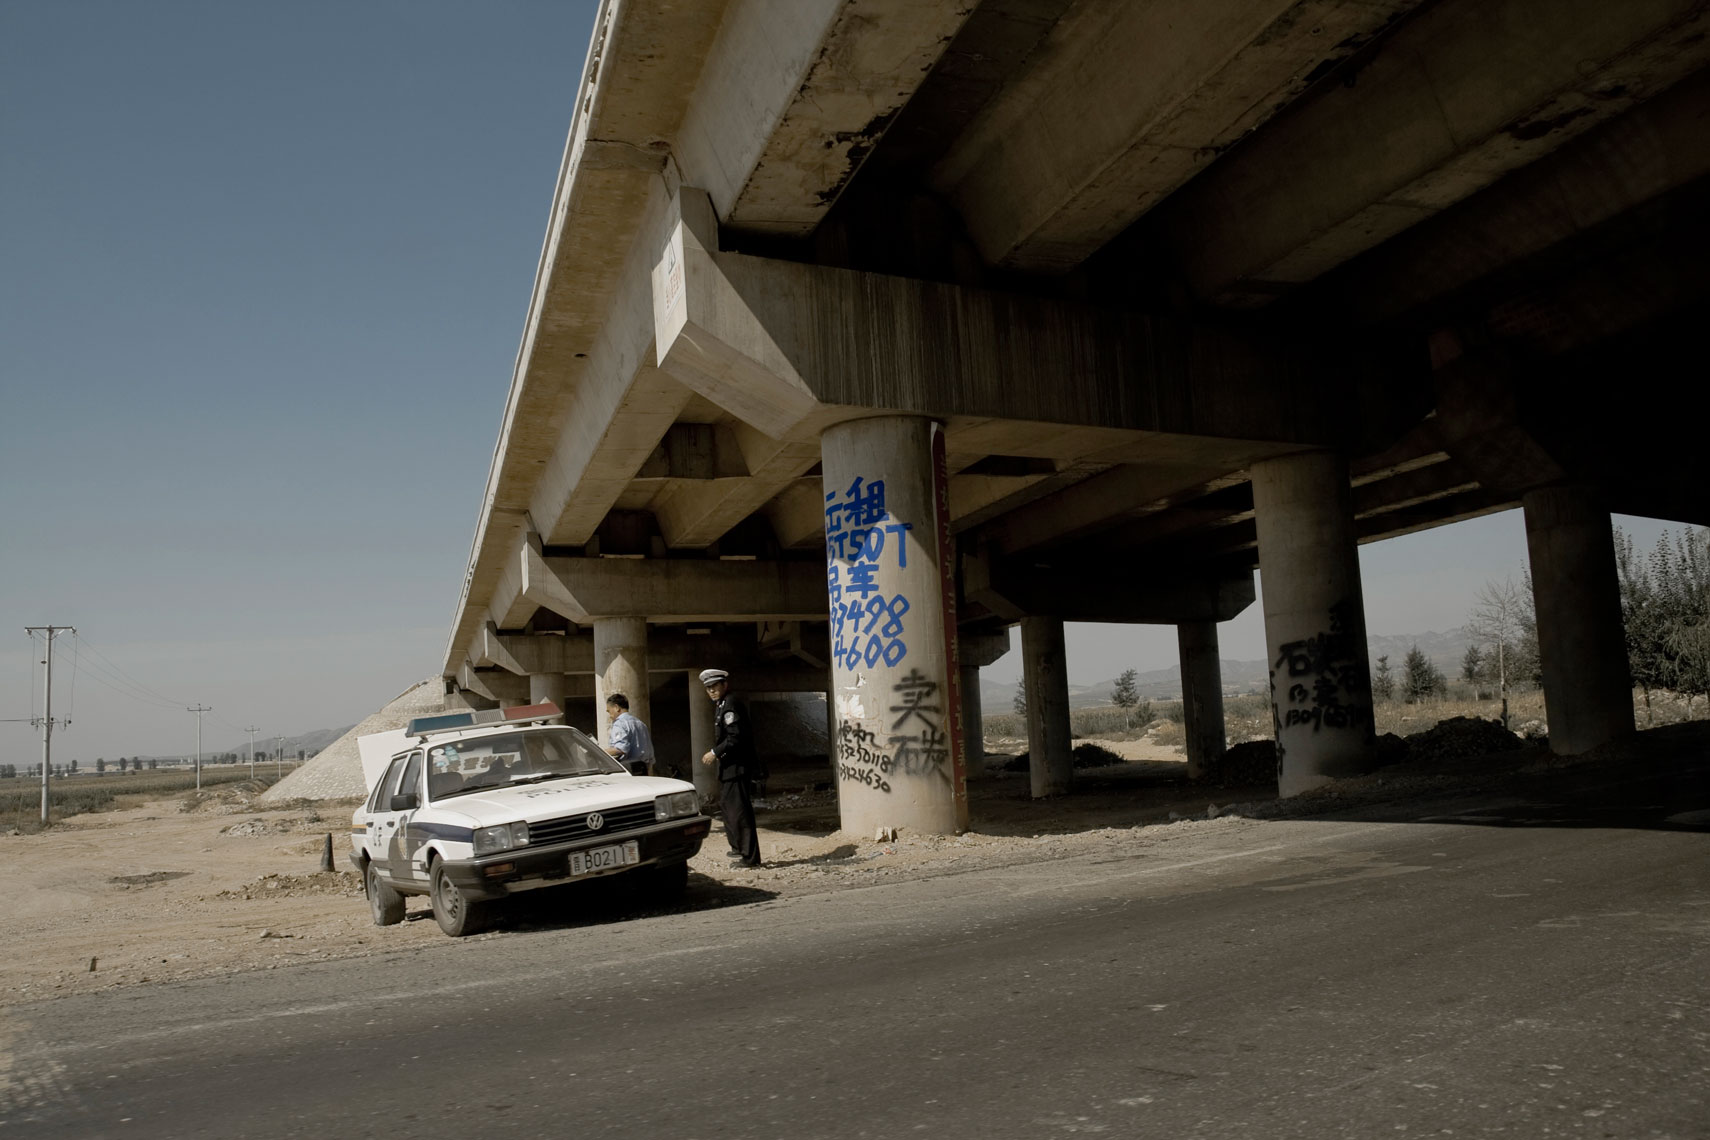 CHINA. Shanxi Province, September 2012. A police patrol near the city of Datong, Shanxi Province.